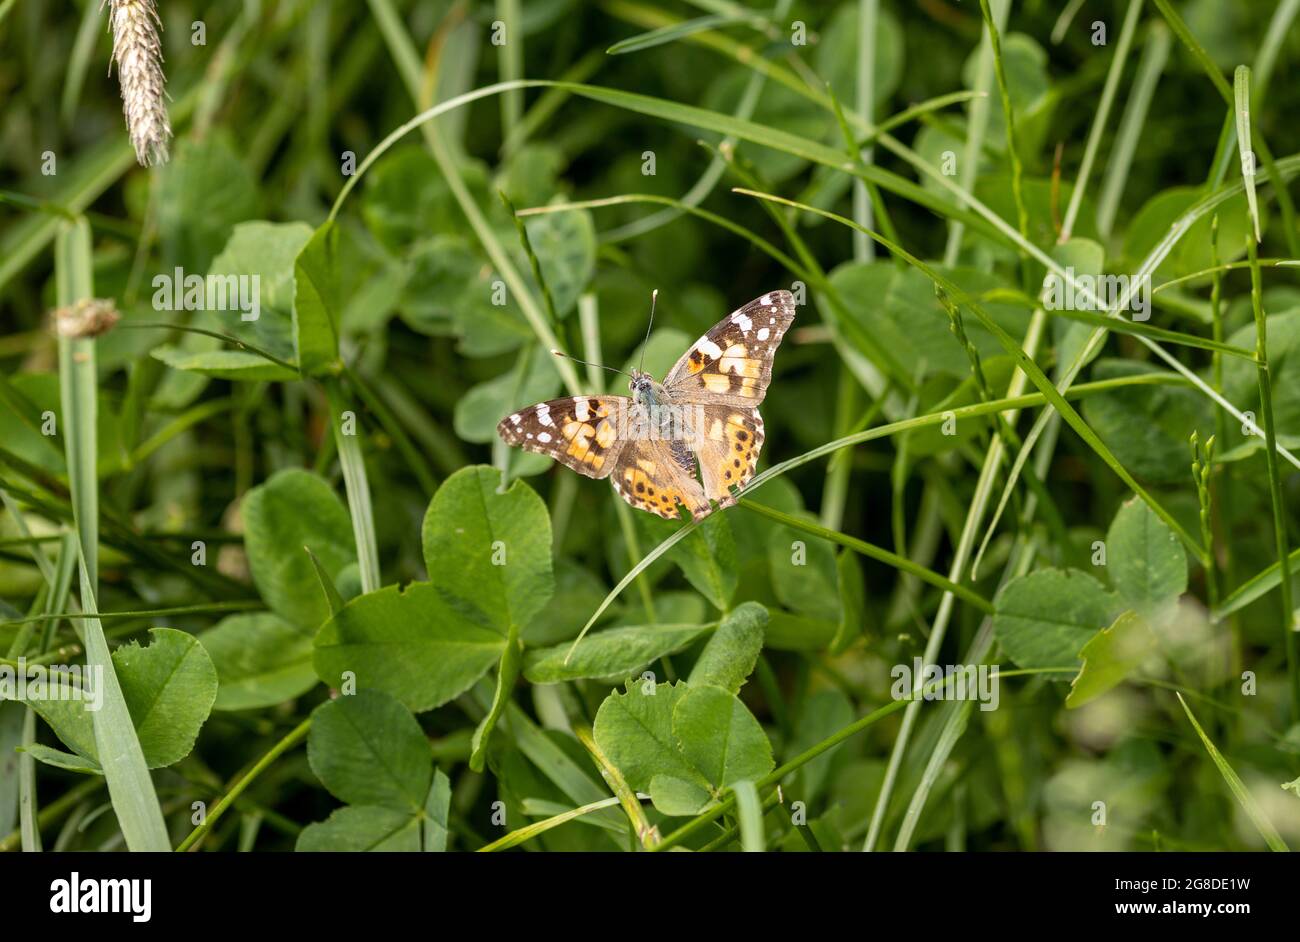 Painted lady butterfly with opened wings perched on leaves Stock Photo